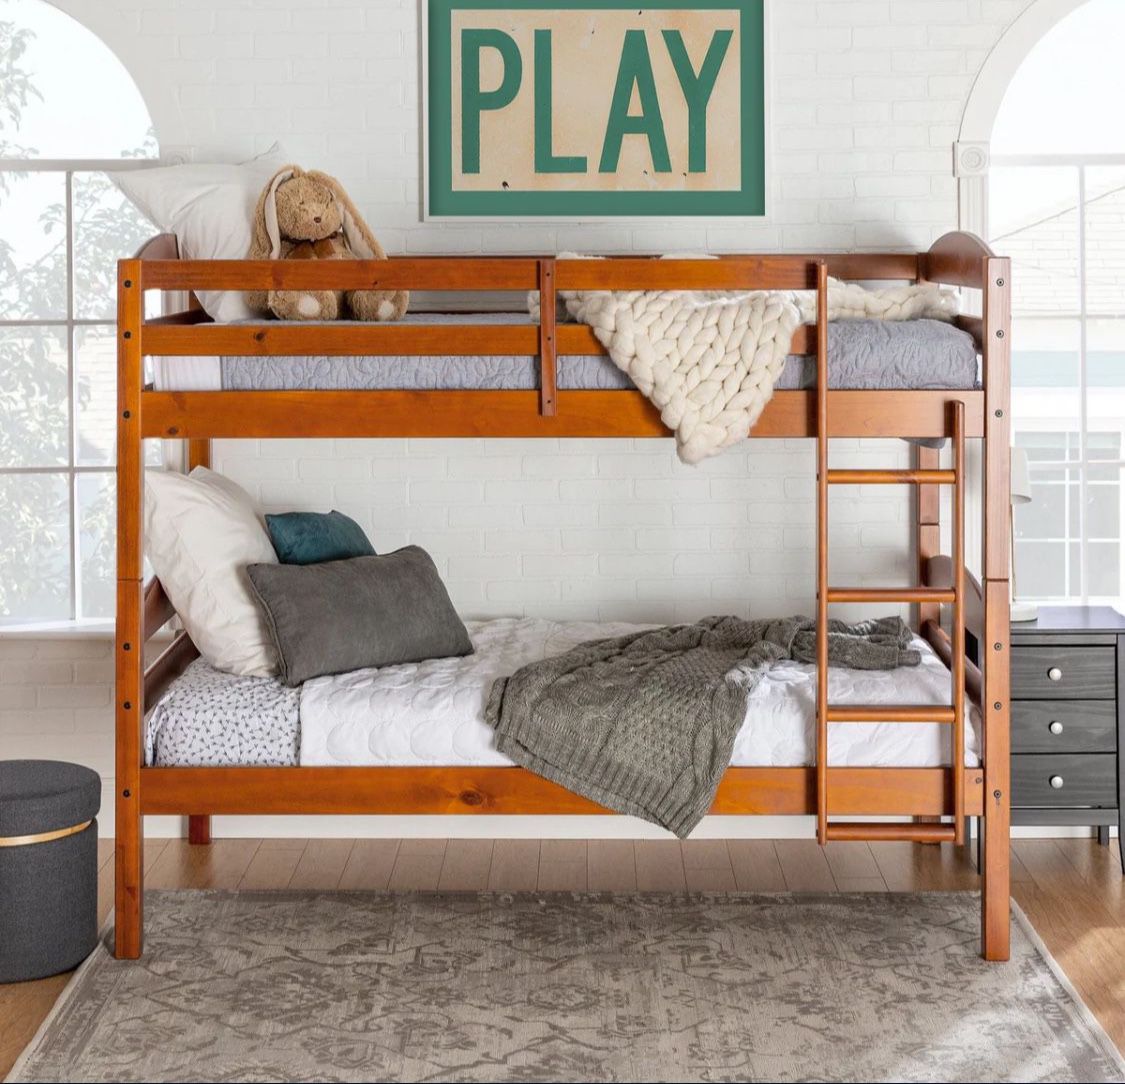 Bunkbed or side-by-side beds